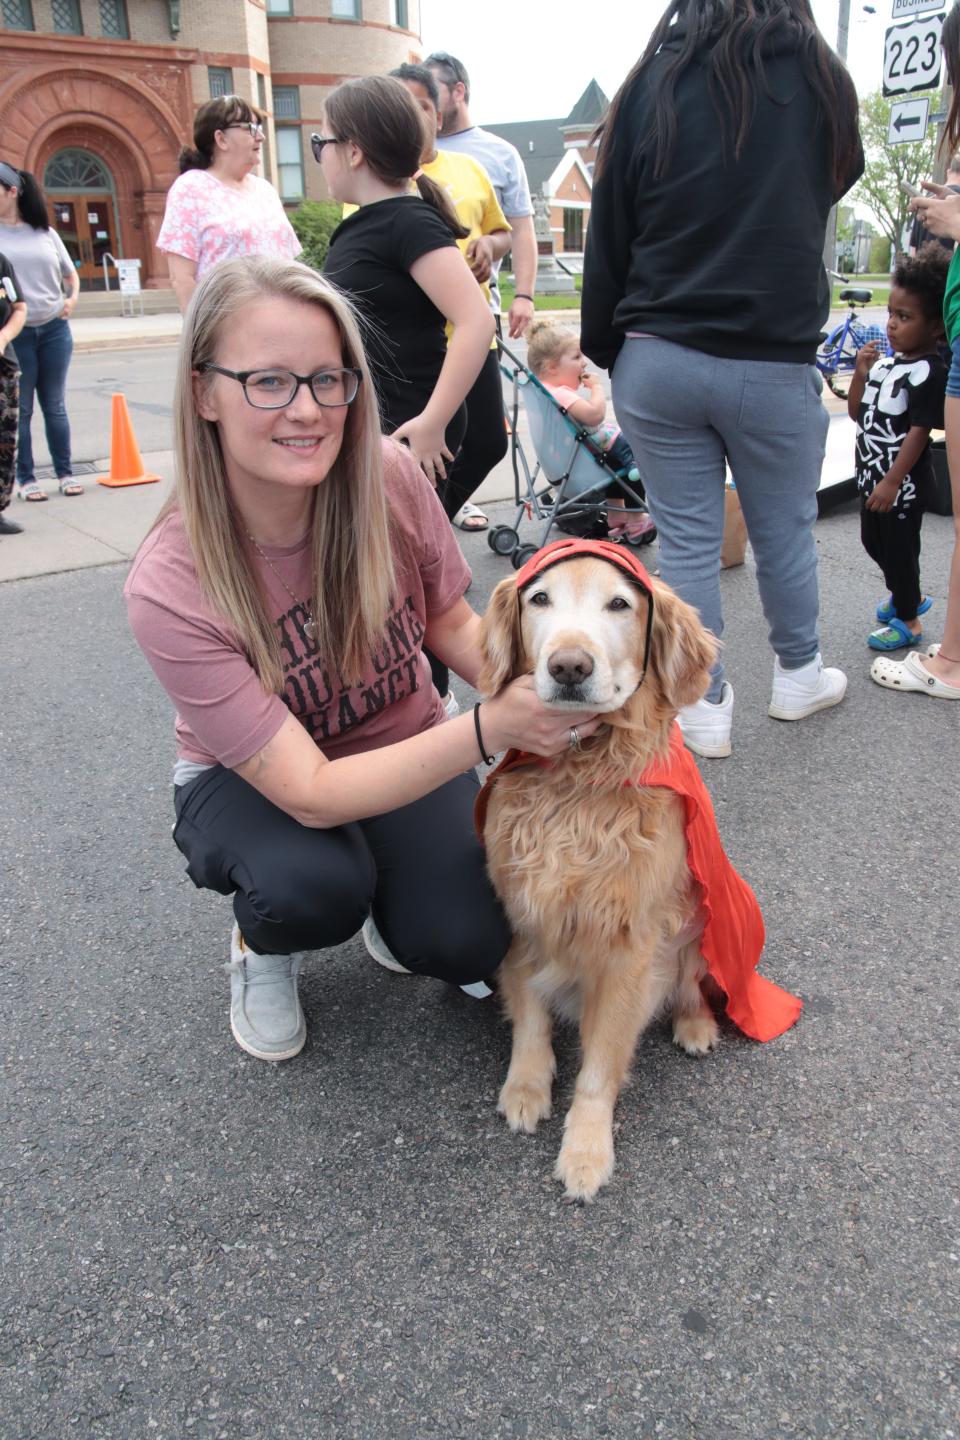 Nichole Edwards and her dog, Beau, of Adrian won the best-looking pet contest Tuesday during the 517 Party at Nova's Soda Pop Candy Shop in downtown Adrian. Beau was dressed as a superhero, complete with mask and cape.